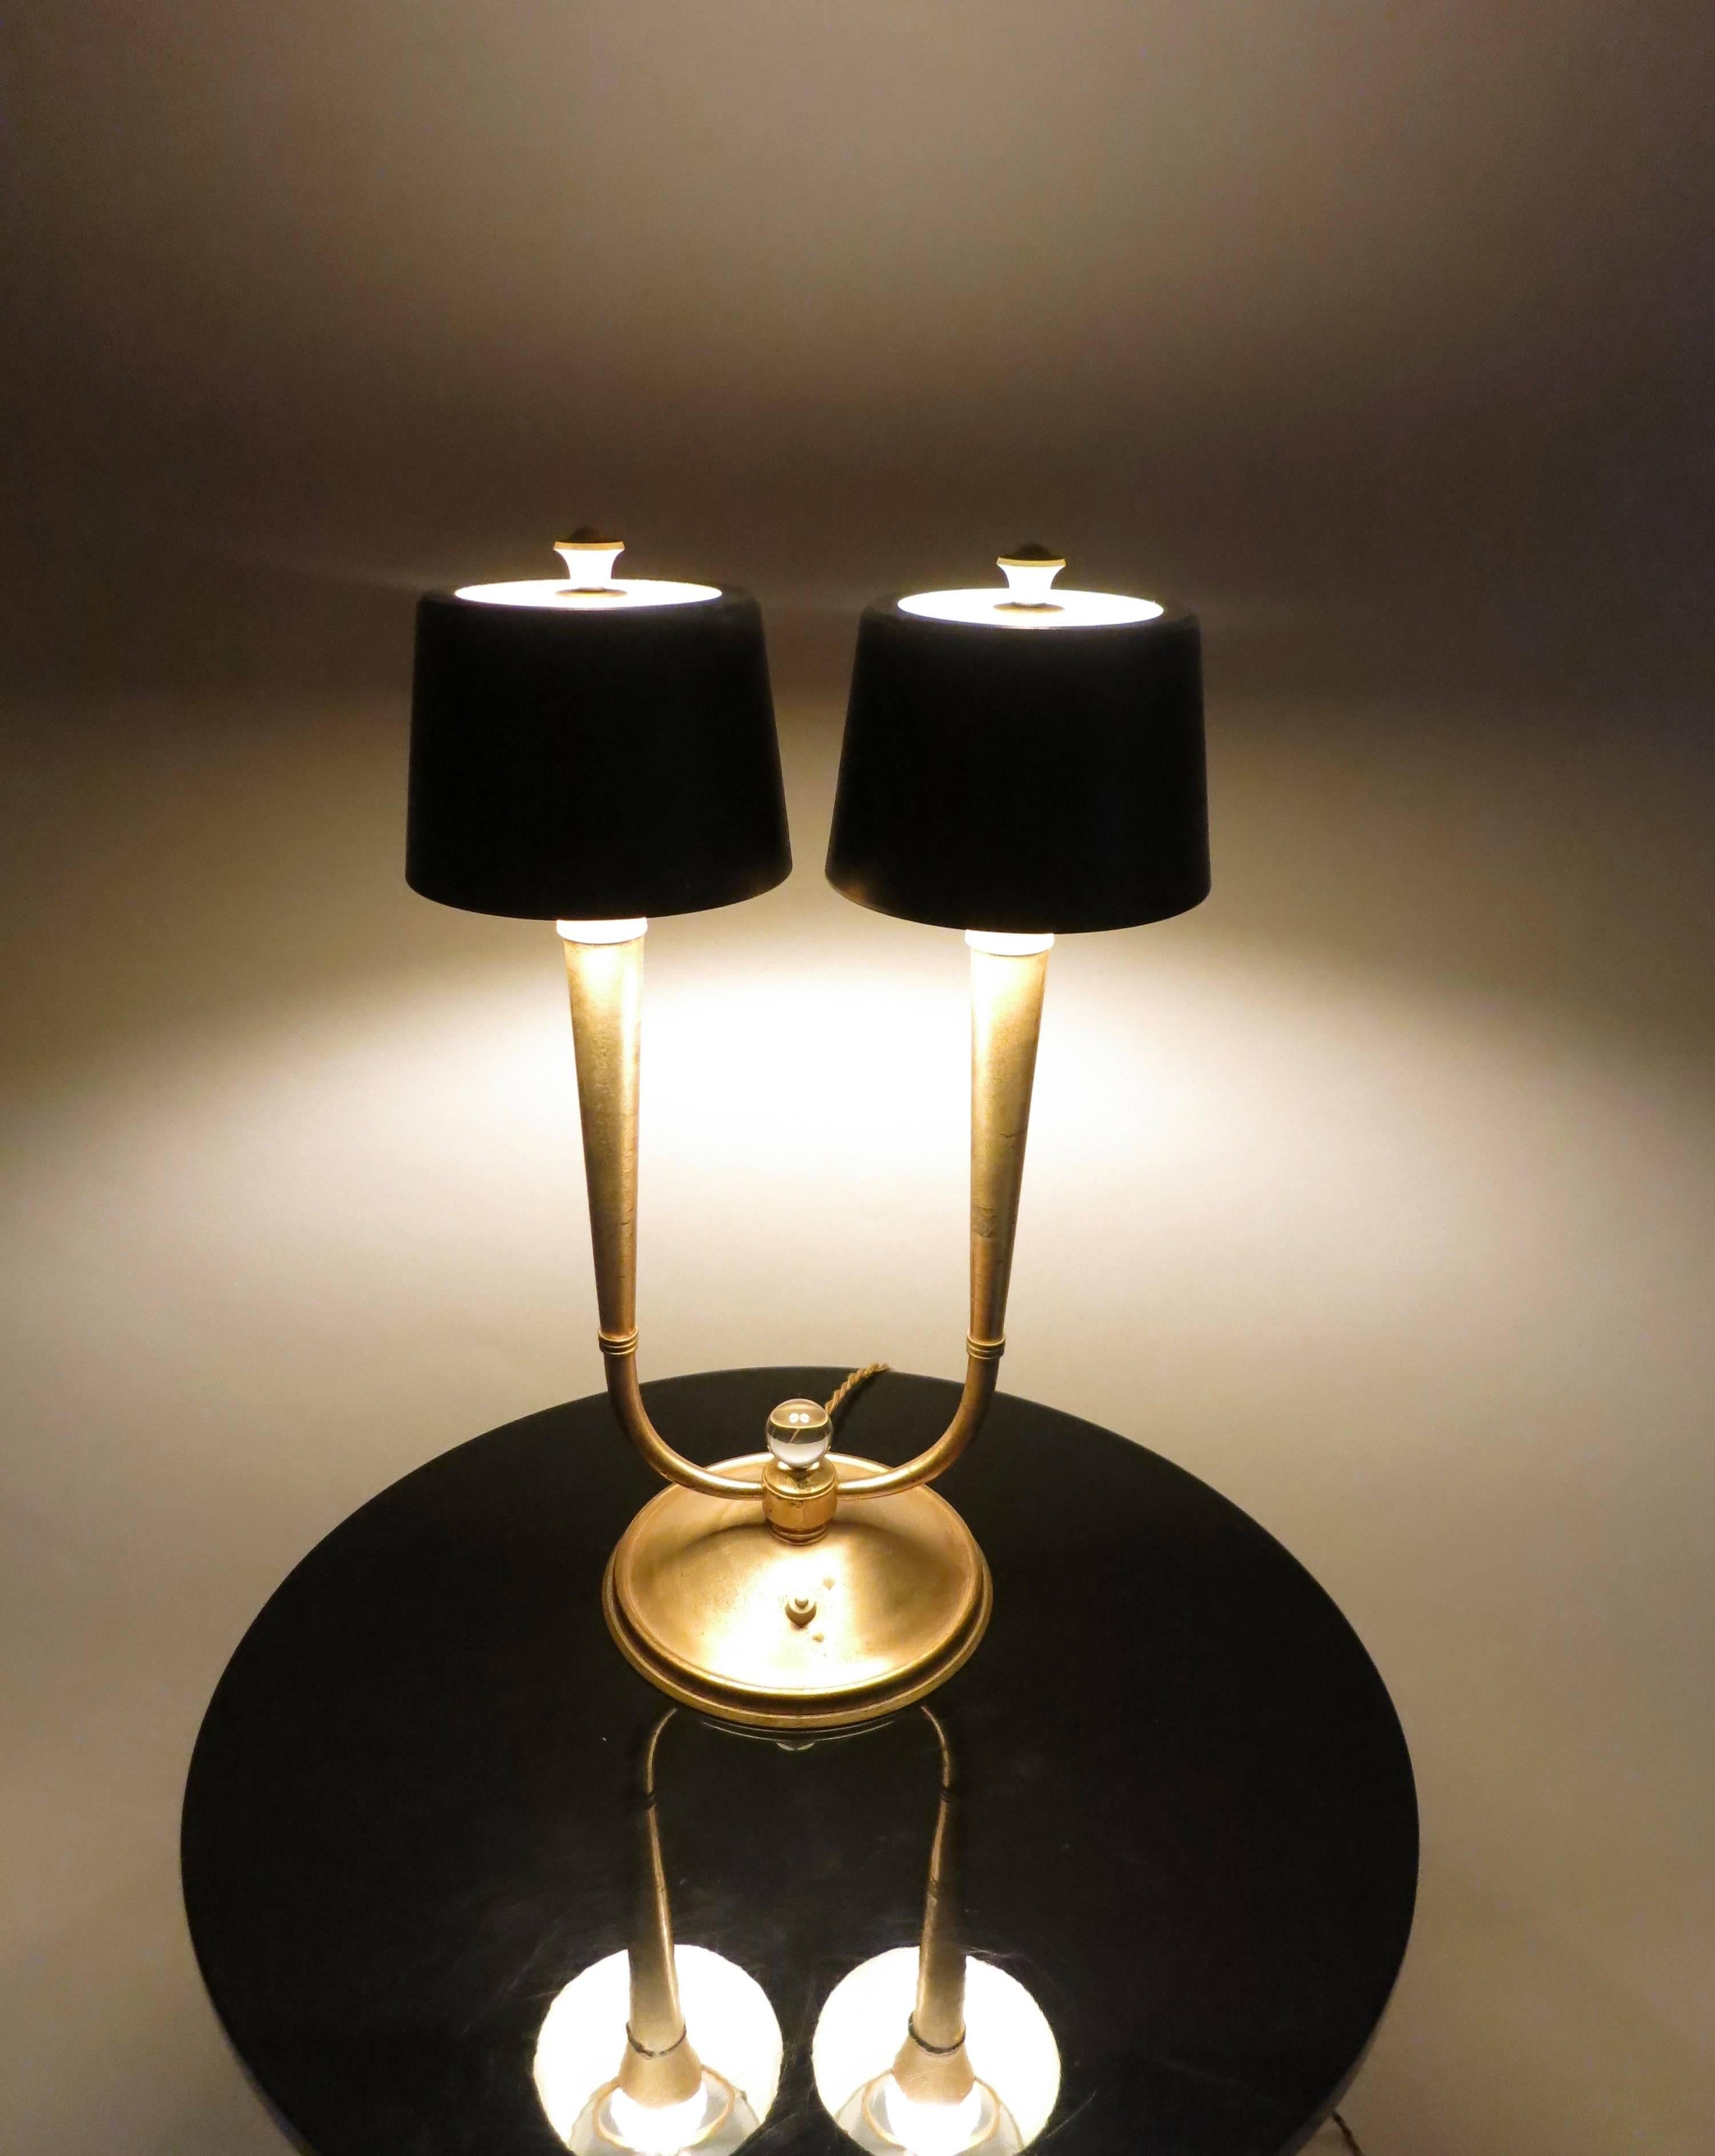 20th Century Gilt Bronze Table Lamps by Gênet et Michon, circa 1930, Made in France For Sale